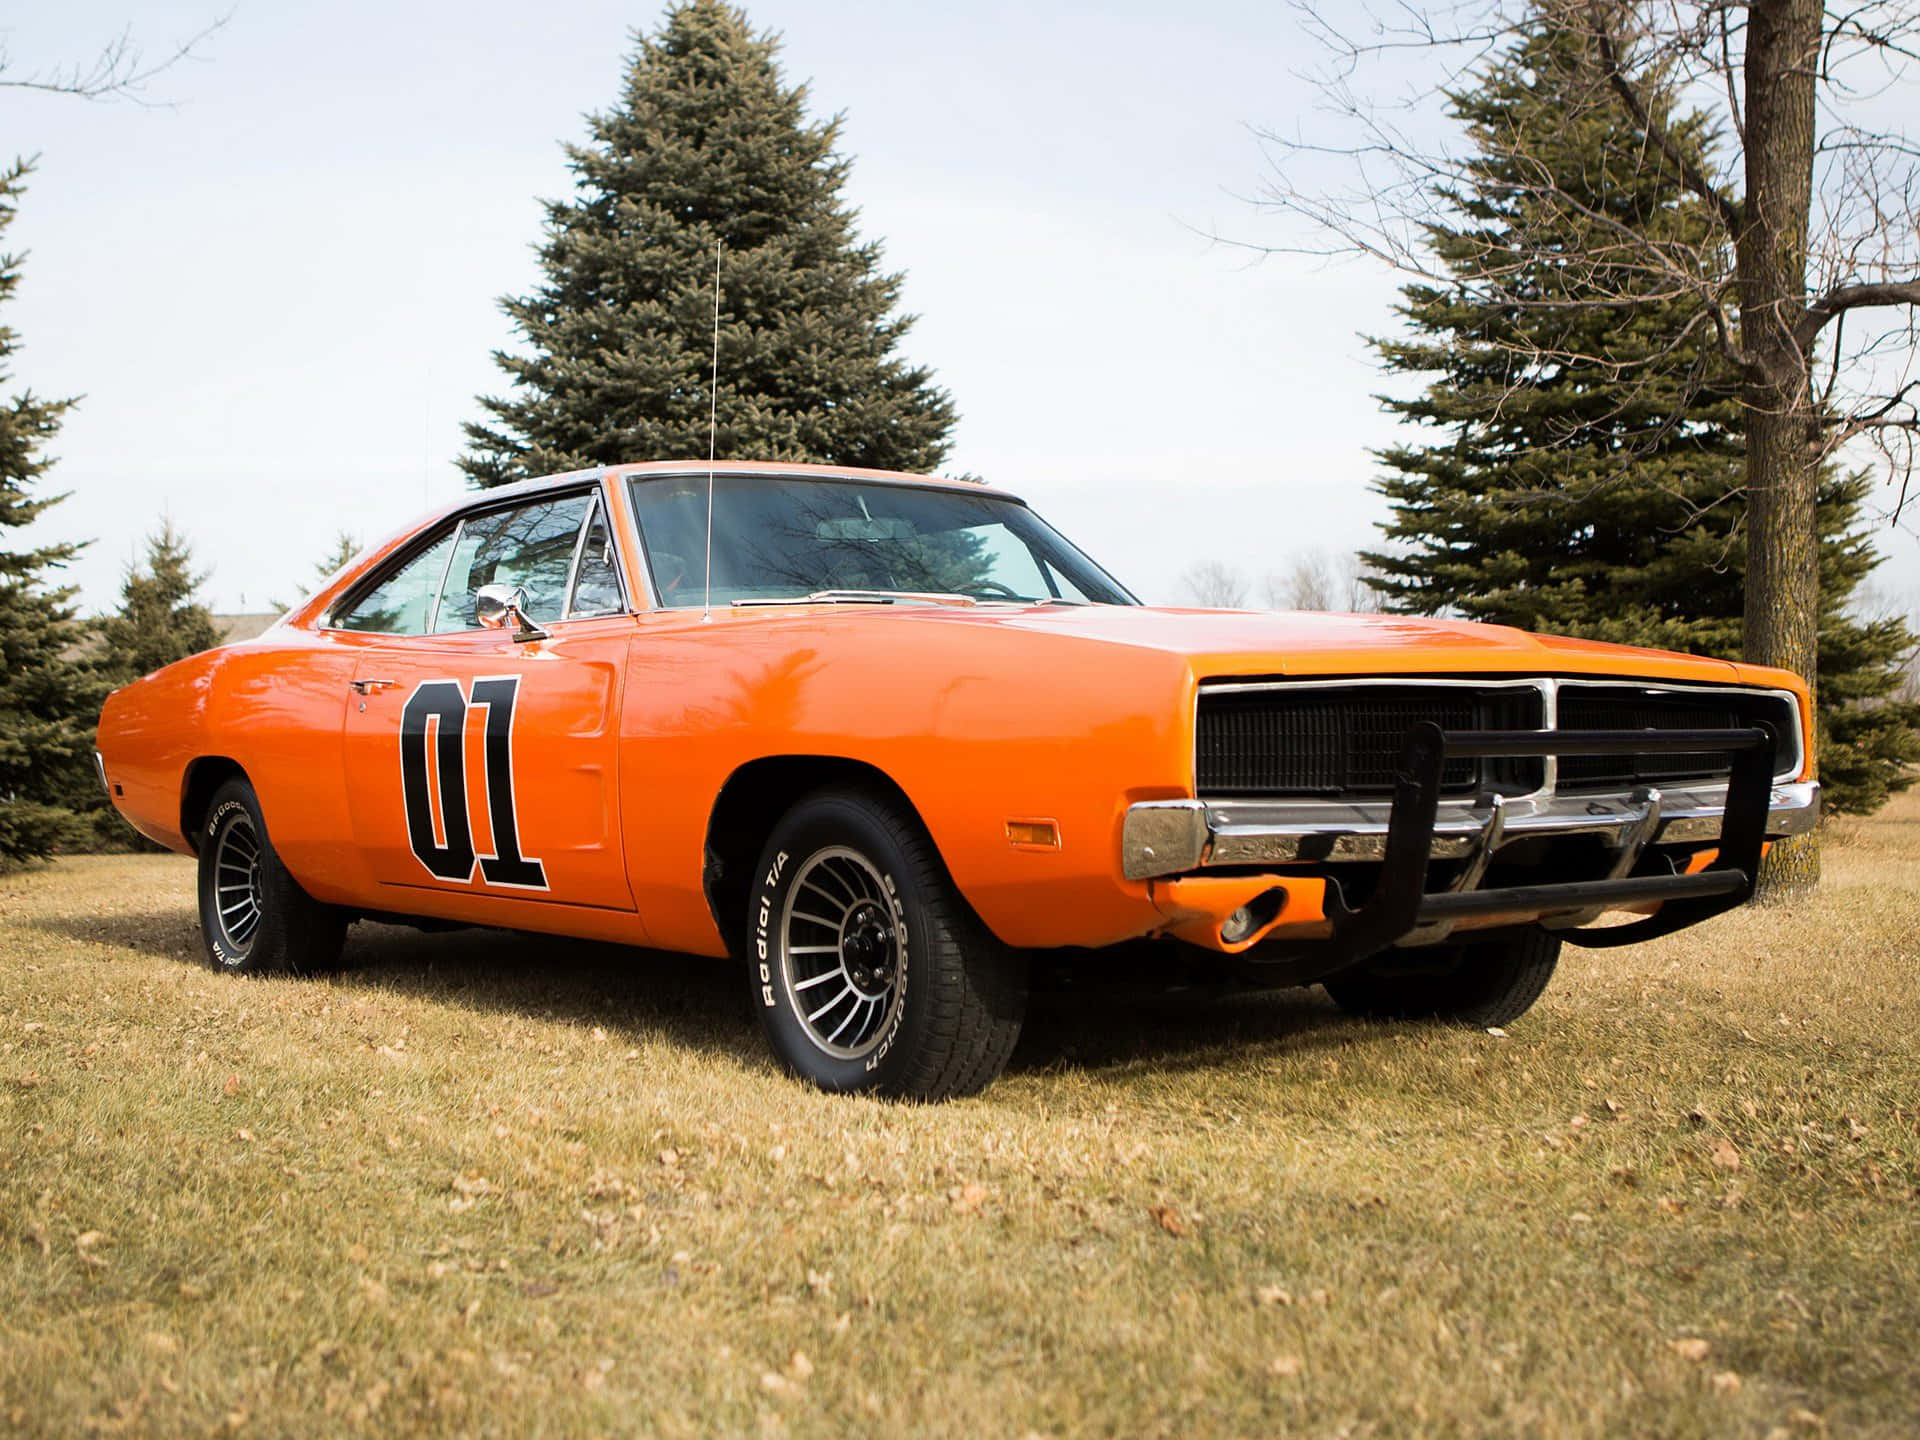 Cruise Toward New Adventures with The Iconic General Lee Wallpaper